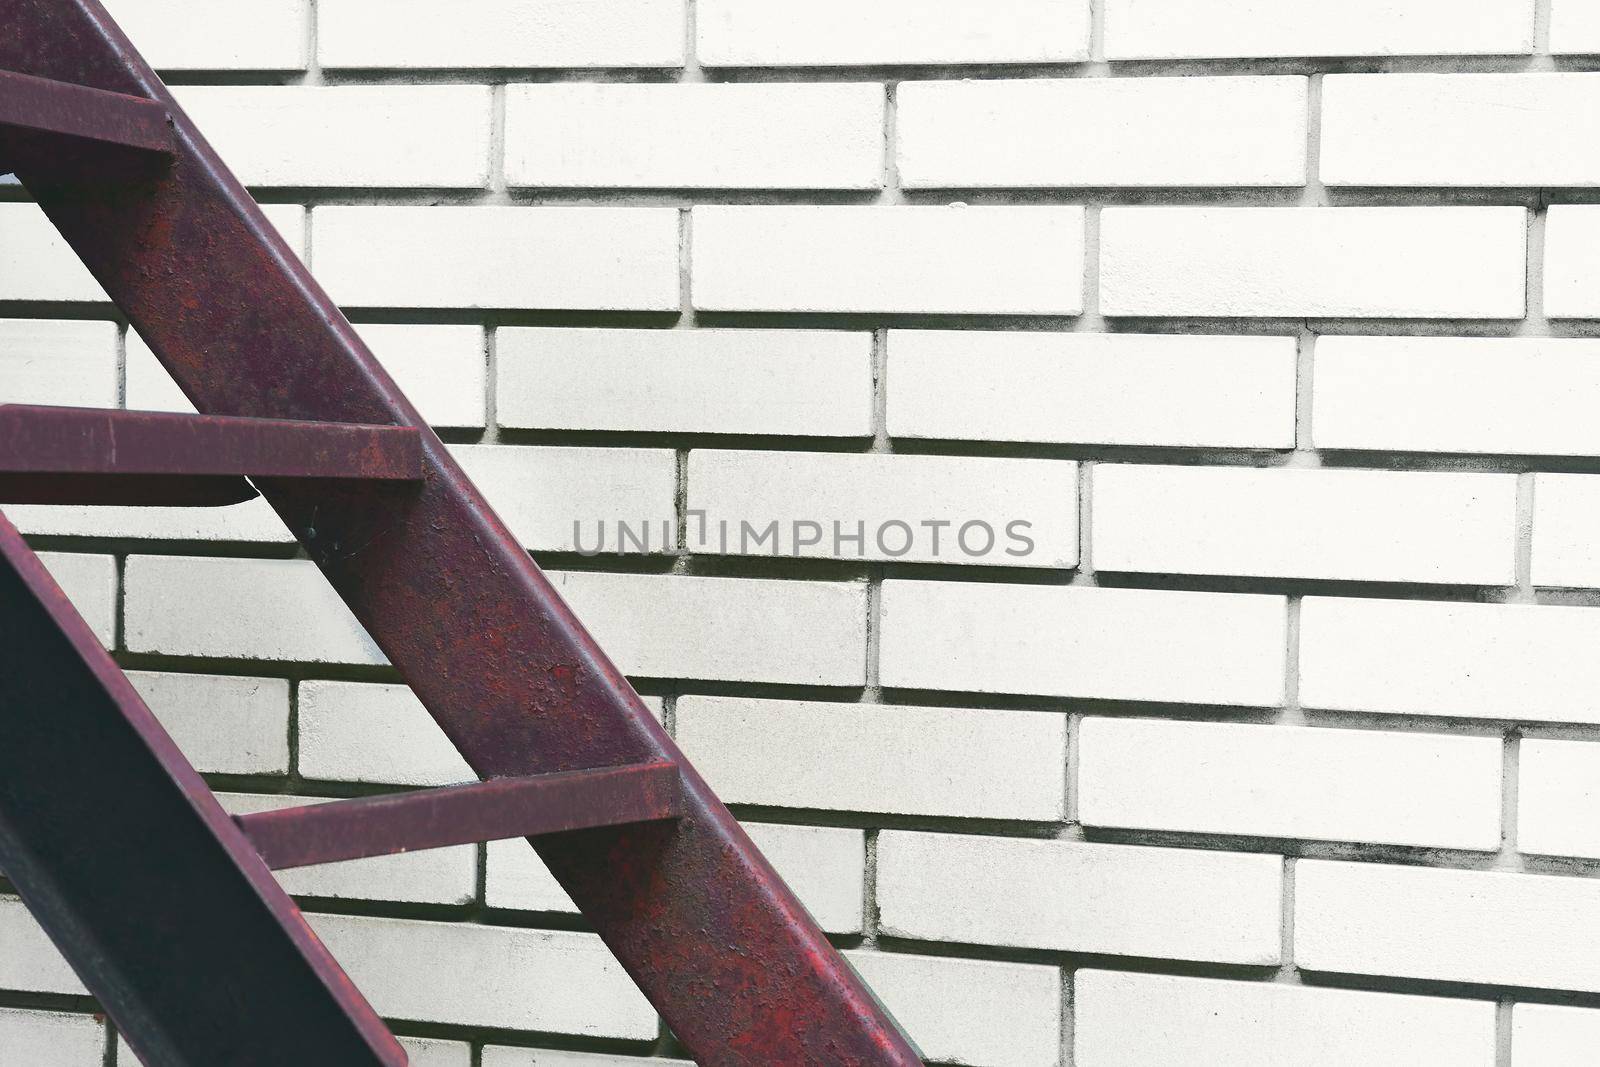 Part of the stairs red metal ladder leading up against of a white brick wall by jovani68